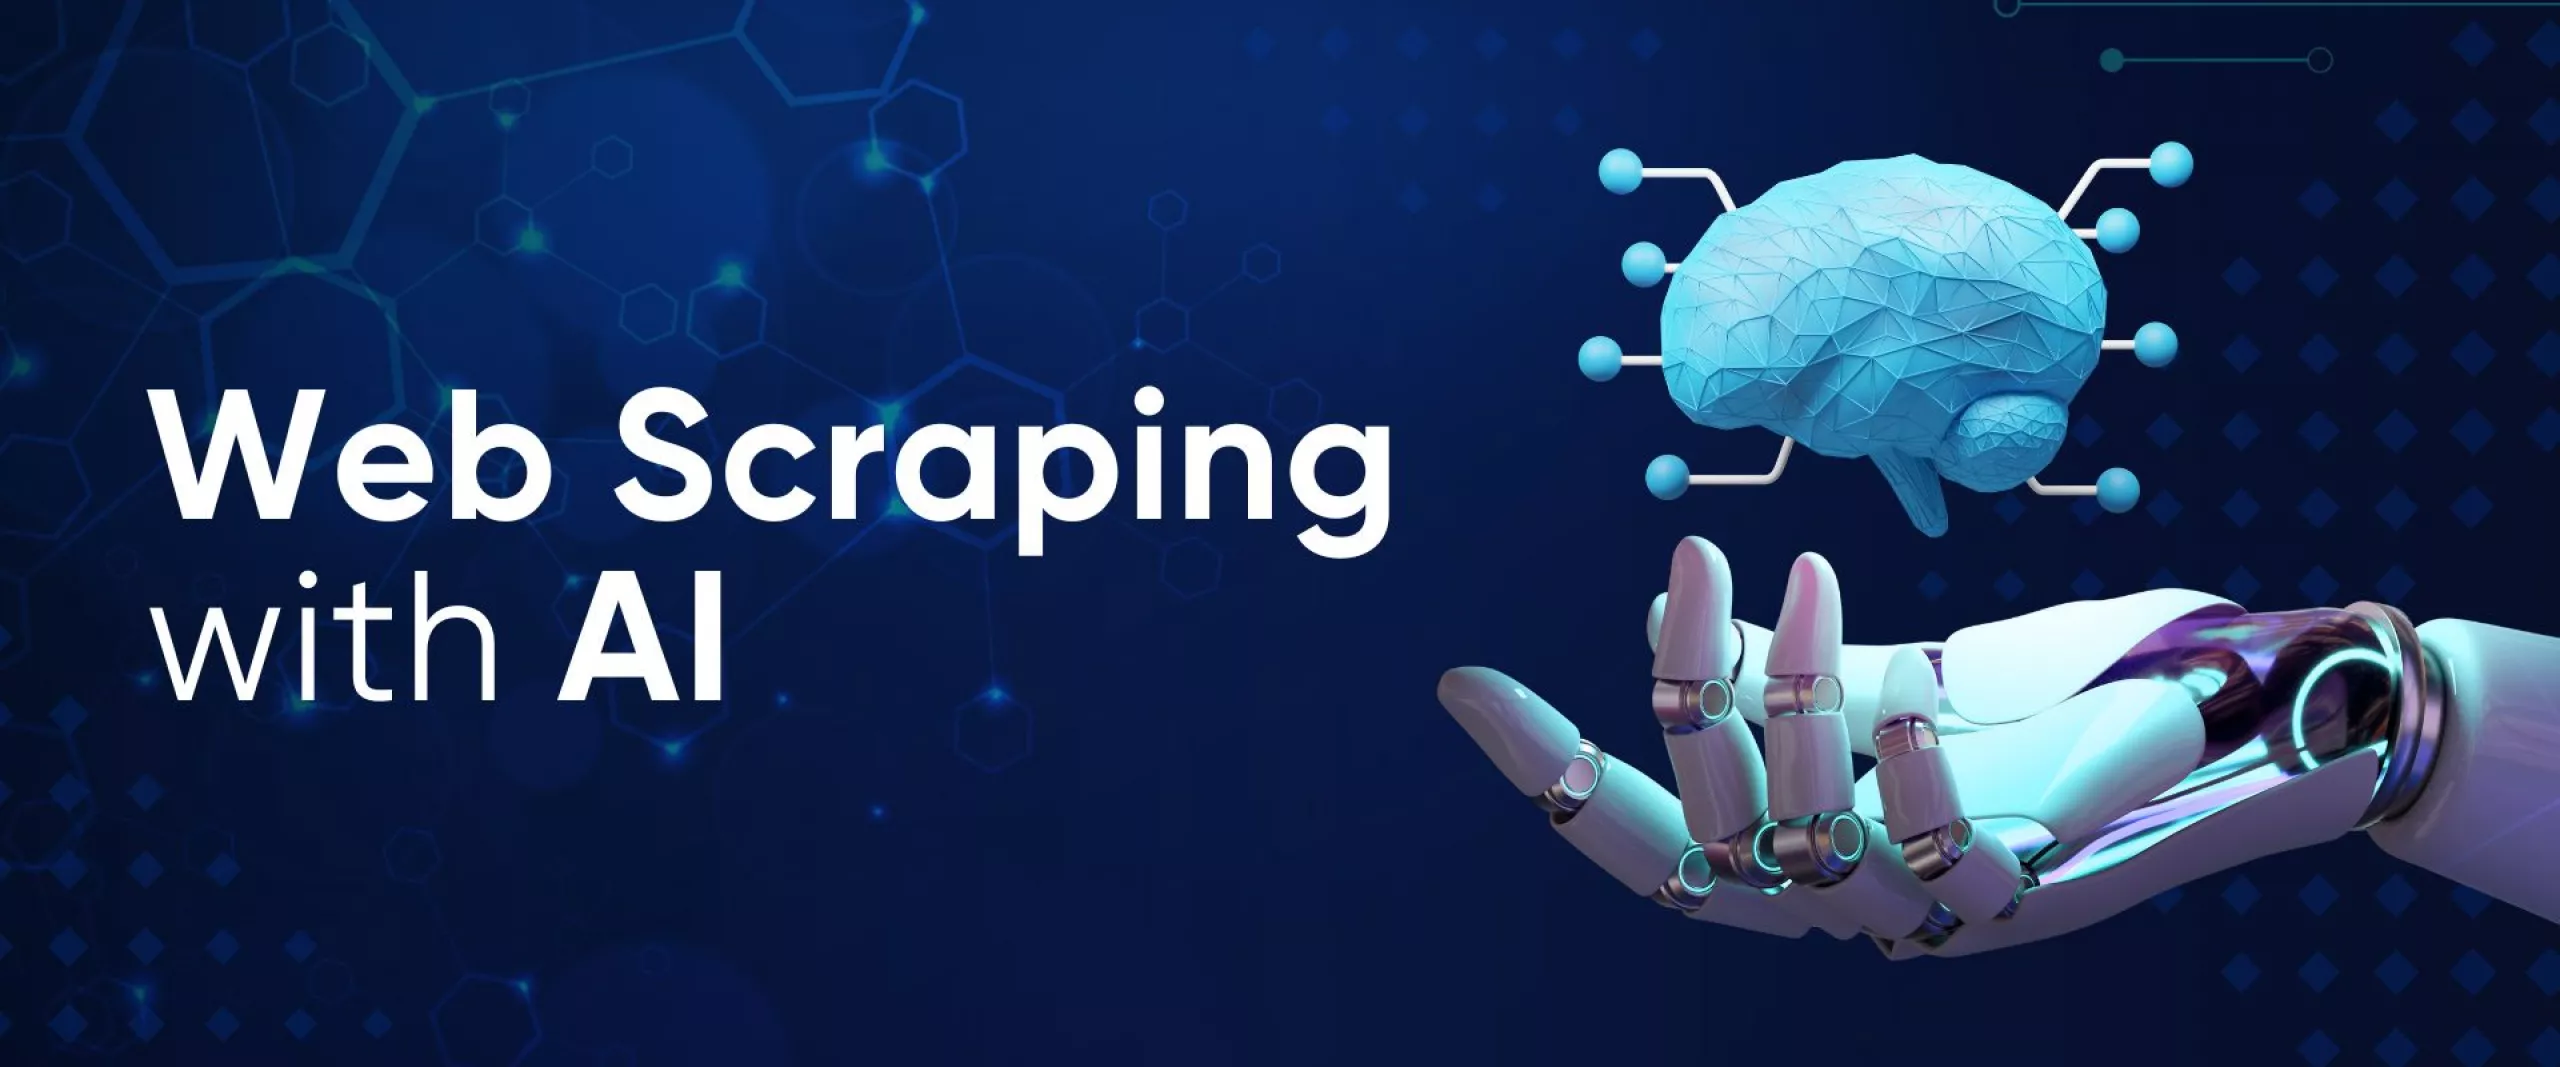 Web Scraping with AI